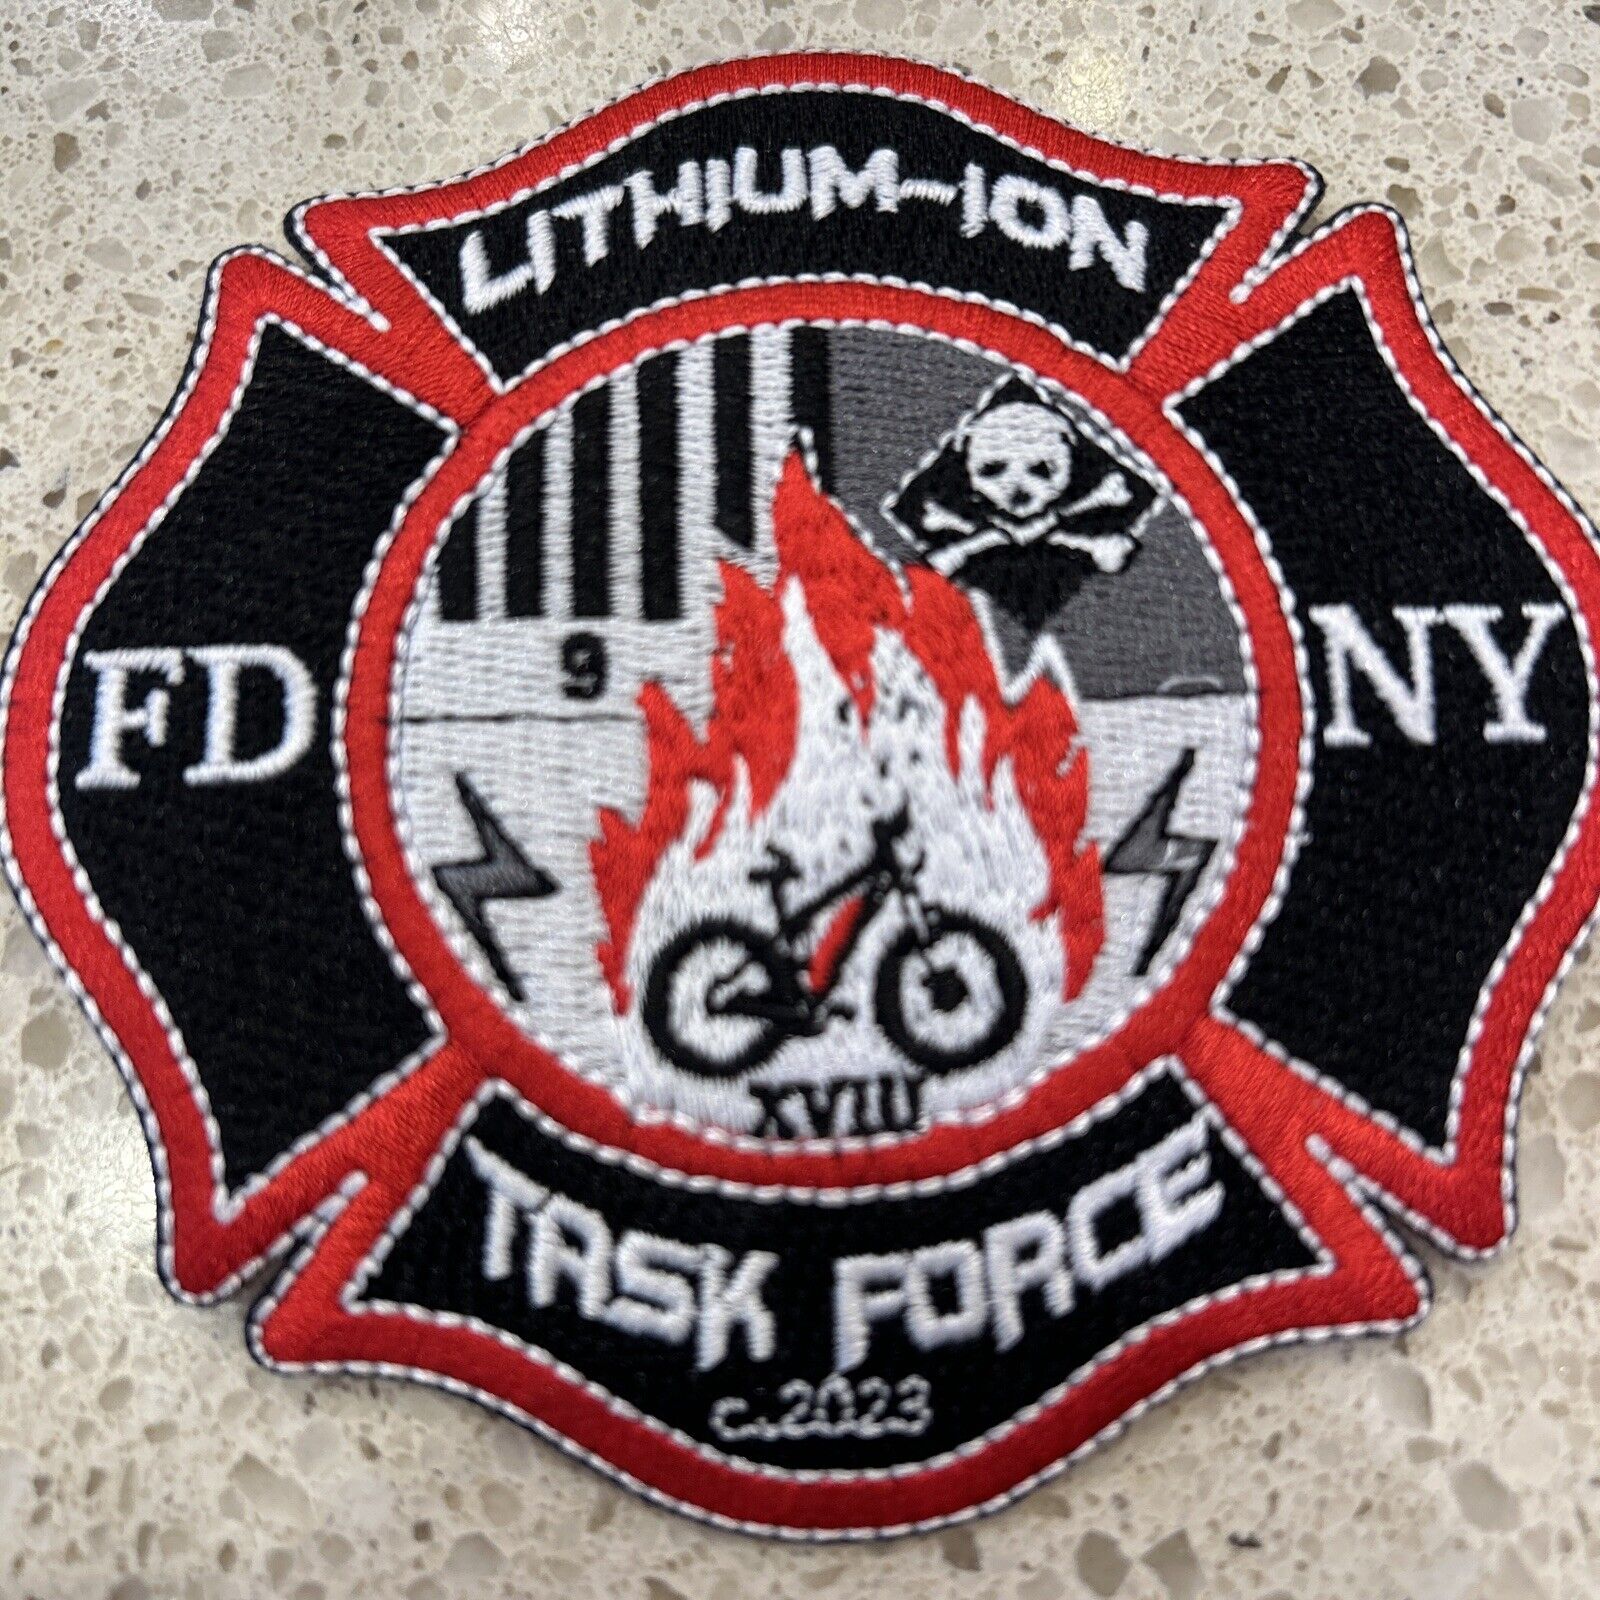 Reduced $$$ FDNY Original Lithium-Ion Task Force Patch